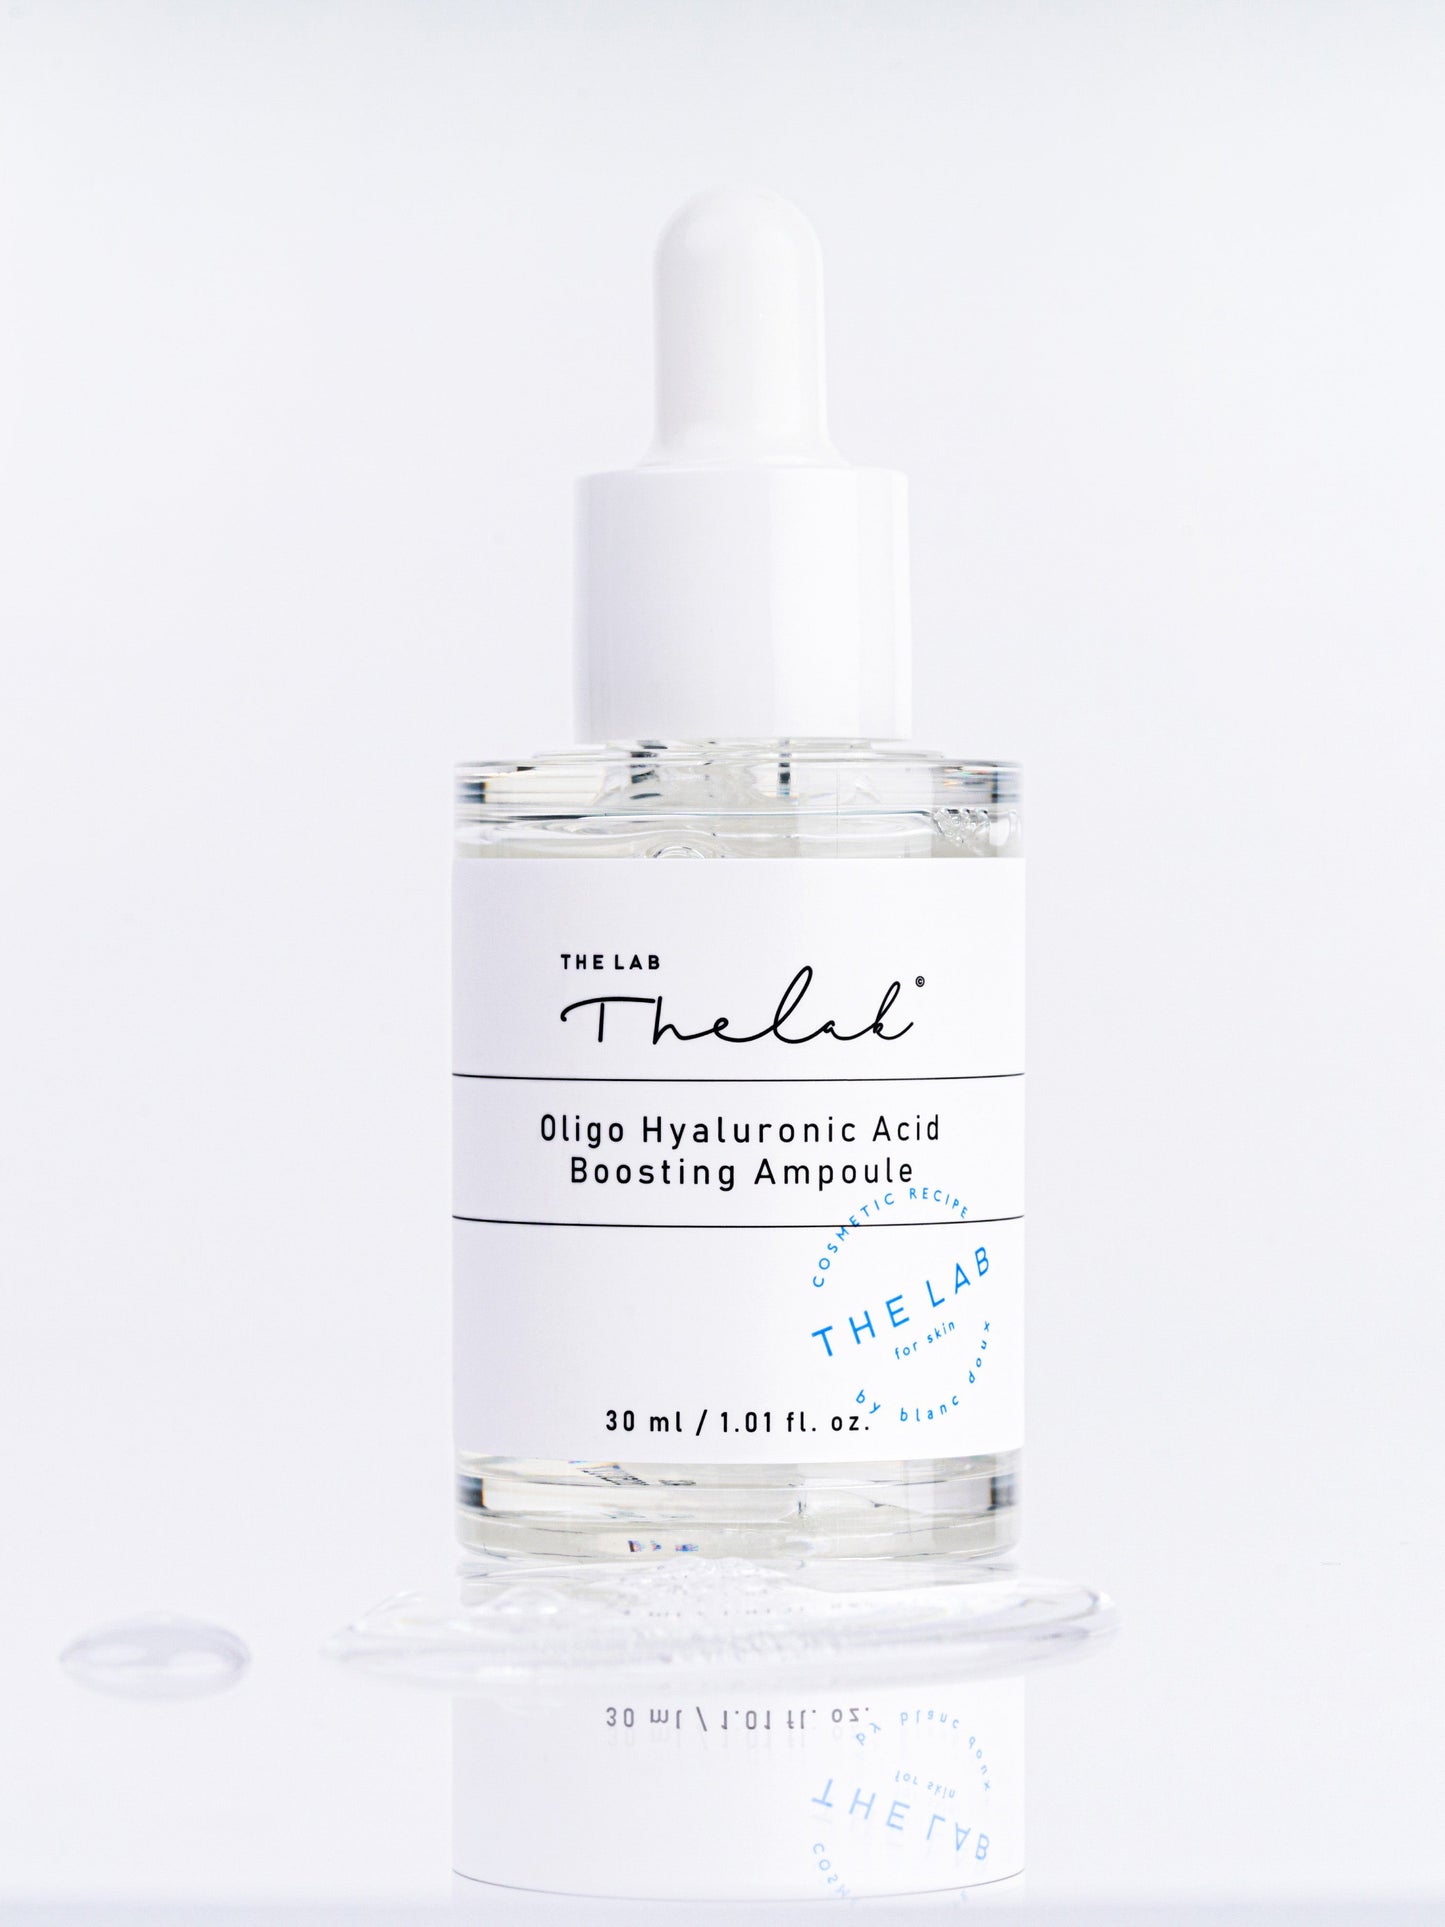 The LAB by Blanc Doux Oligo Hyaluronic Acid Boosting Ampoule